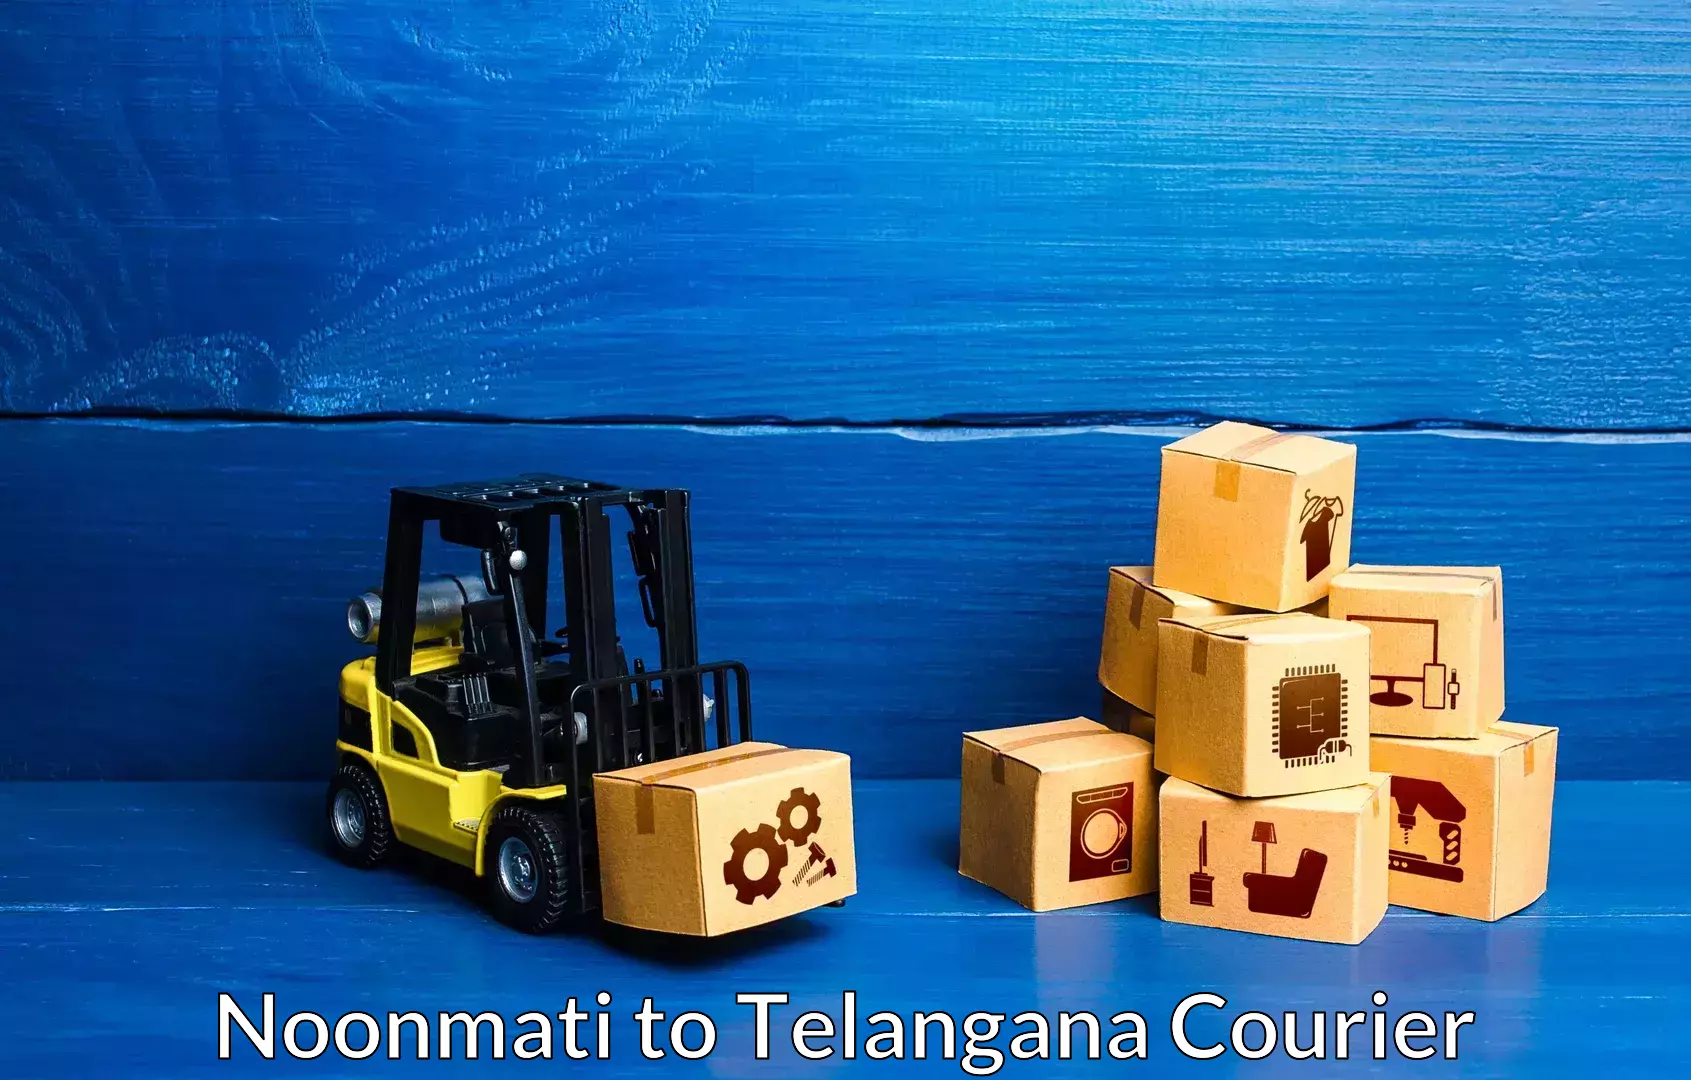 Trusted relocation experts Noonmati to Telangana